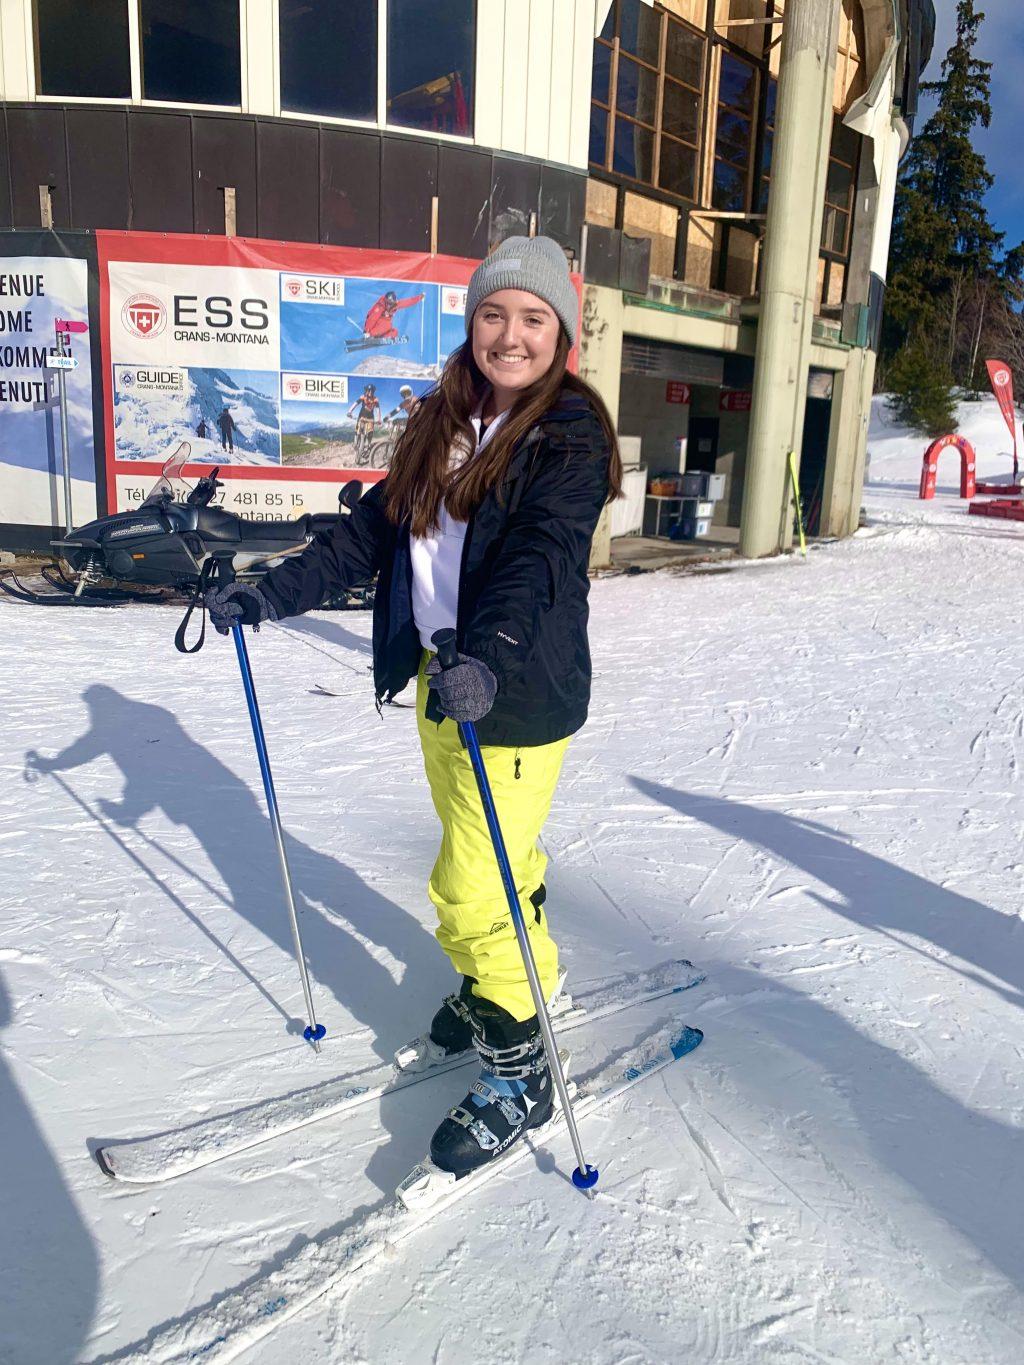 Spring student sophomore Katherine Delong spends her first weekend in Switzerland skiing in the Alps with new friends from the program. Delong said she laughed when young kids flew by while she was just starting to learn. Photo courtesy of Katherine Delong